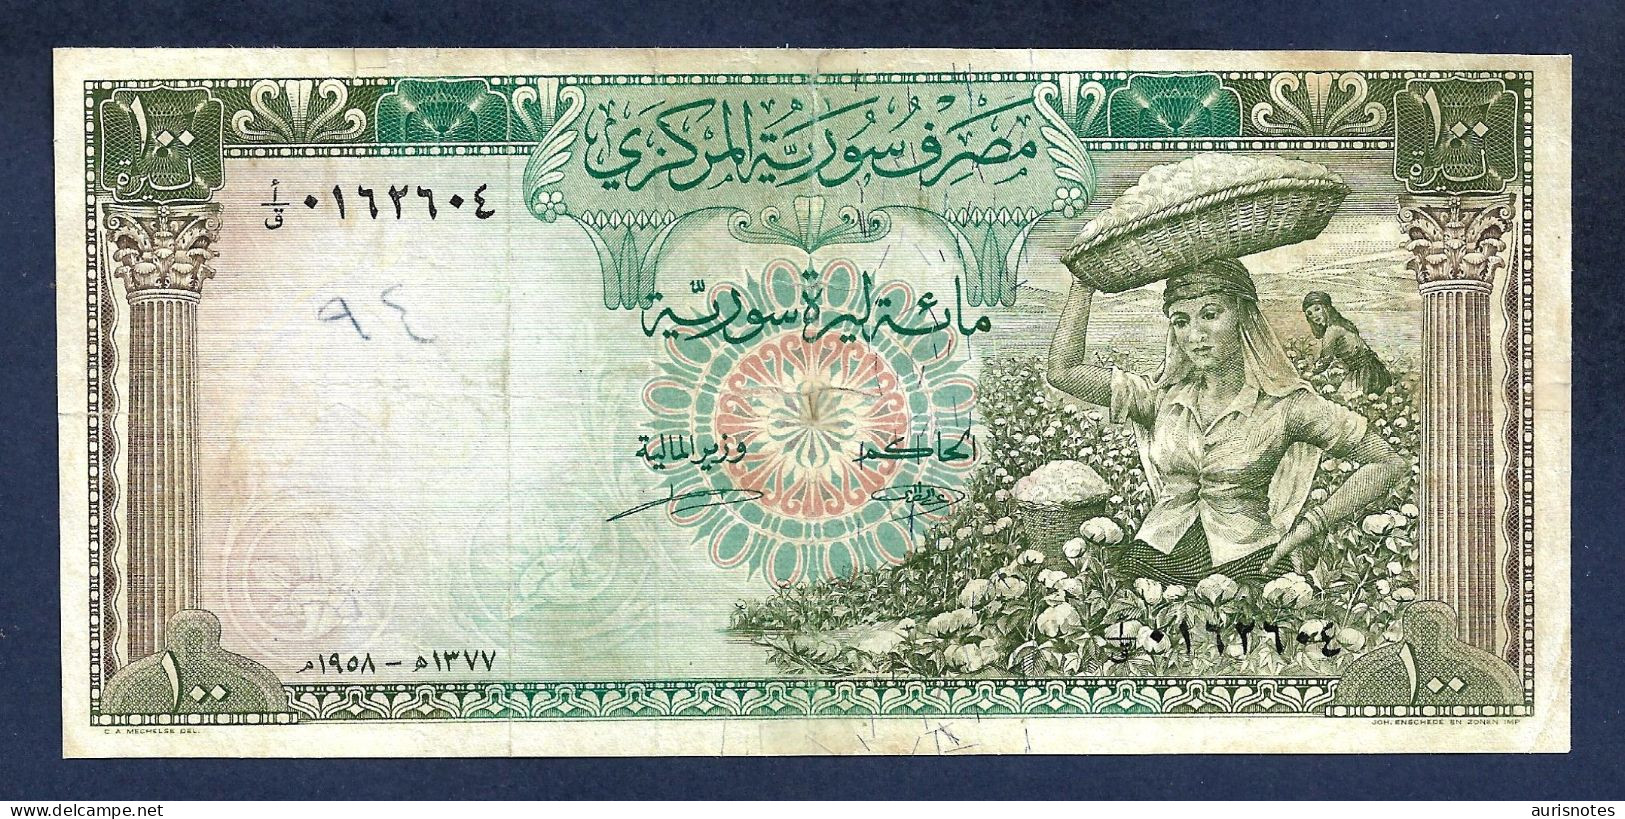 Syria 100 Pounds 1958 P91a First Issue Scarce Fine/VF - Siria